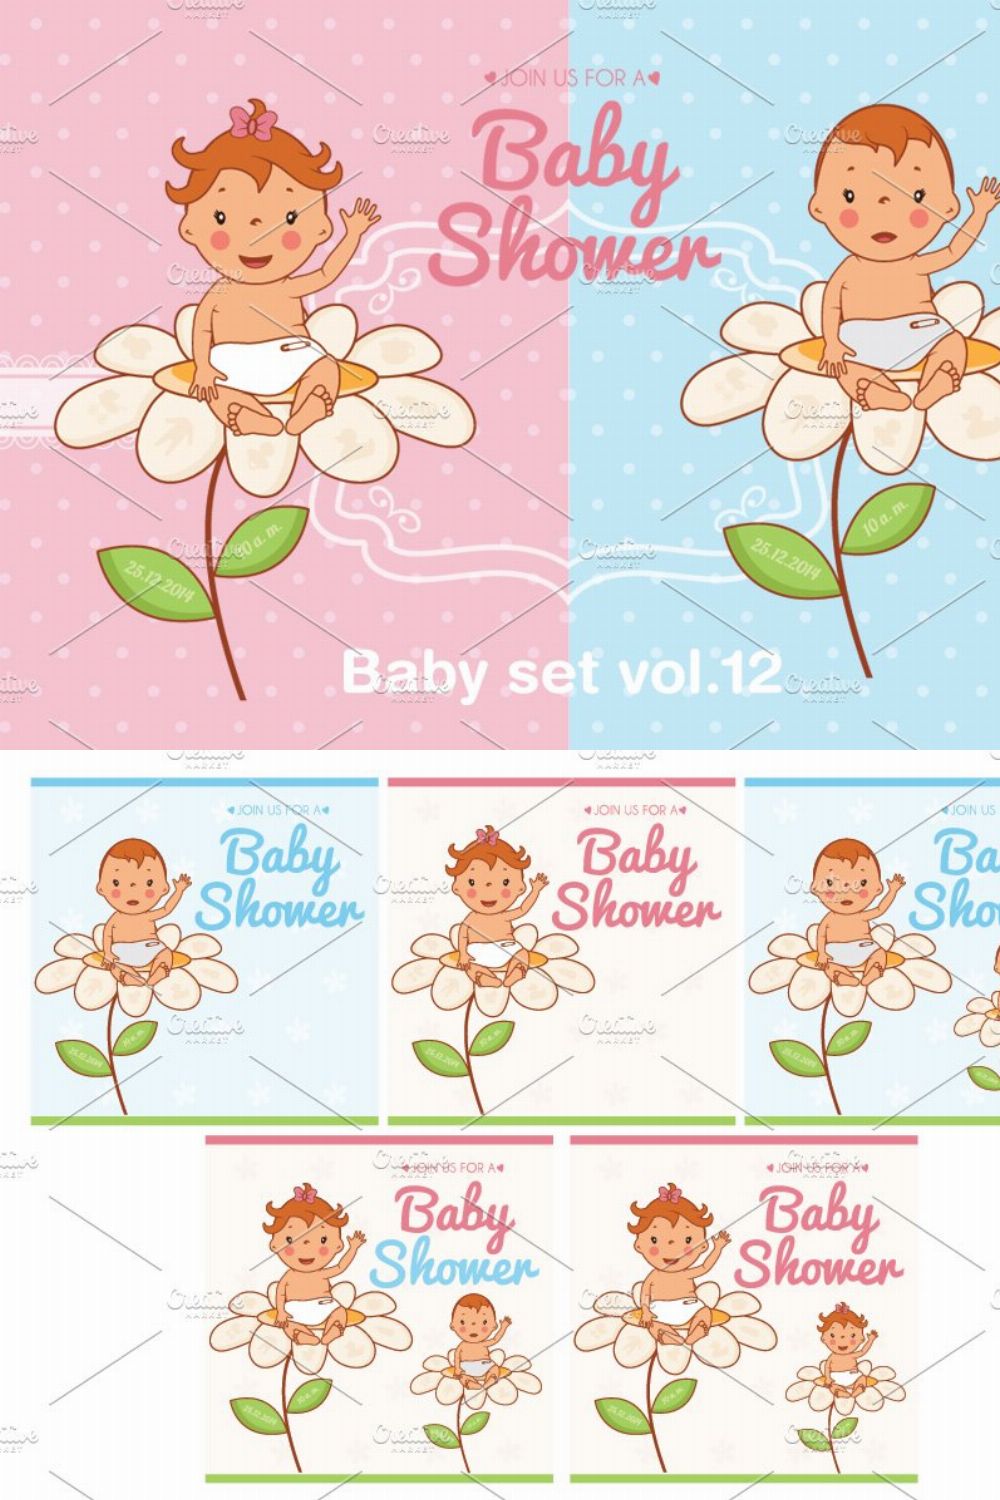 Baby set vol.12 pinterest preview image.